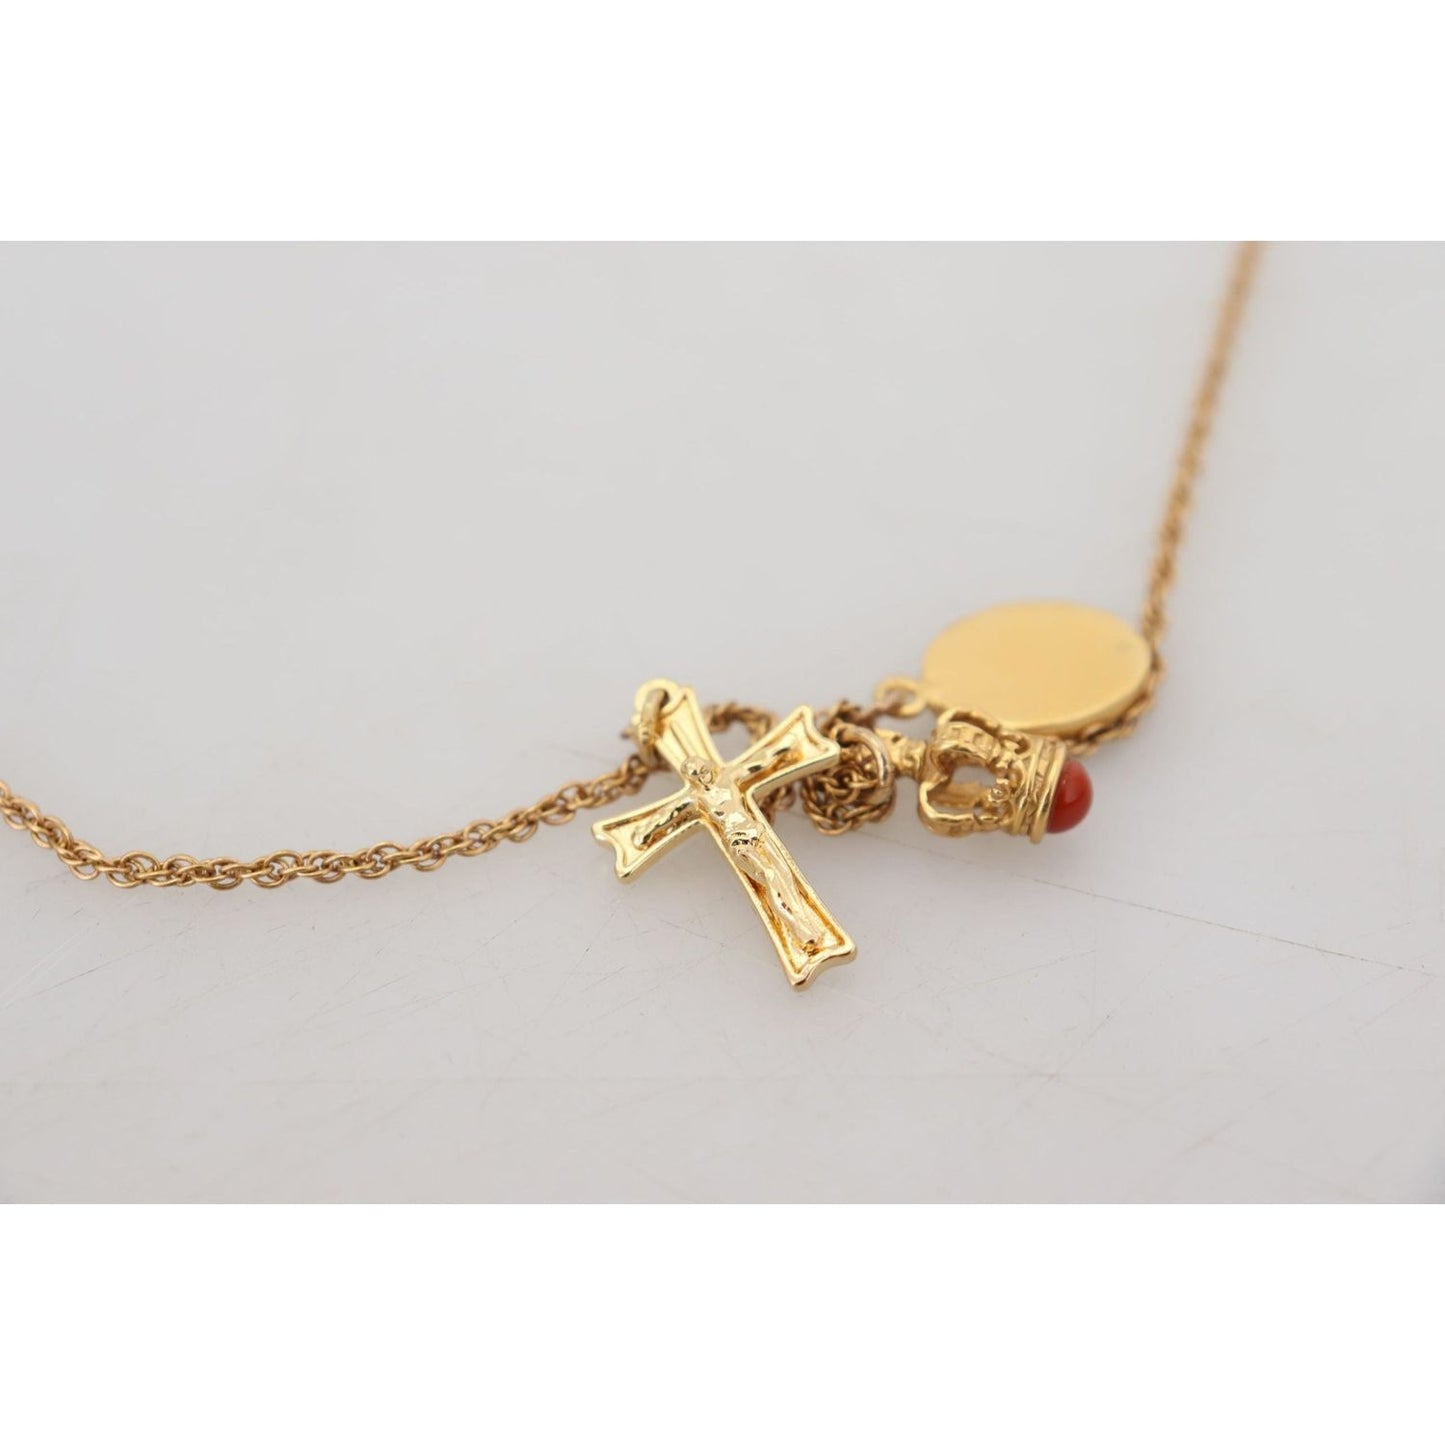 Dolce & Gabbana Elegant Gold Tone Charm Necklace with Cross Pendant gold-brass-chain-religious-cross-pendant-charm-necklace WOMAN NECKLACE IMG_4233-scaled-330a1208-40e.jpg